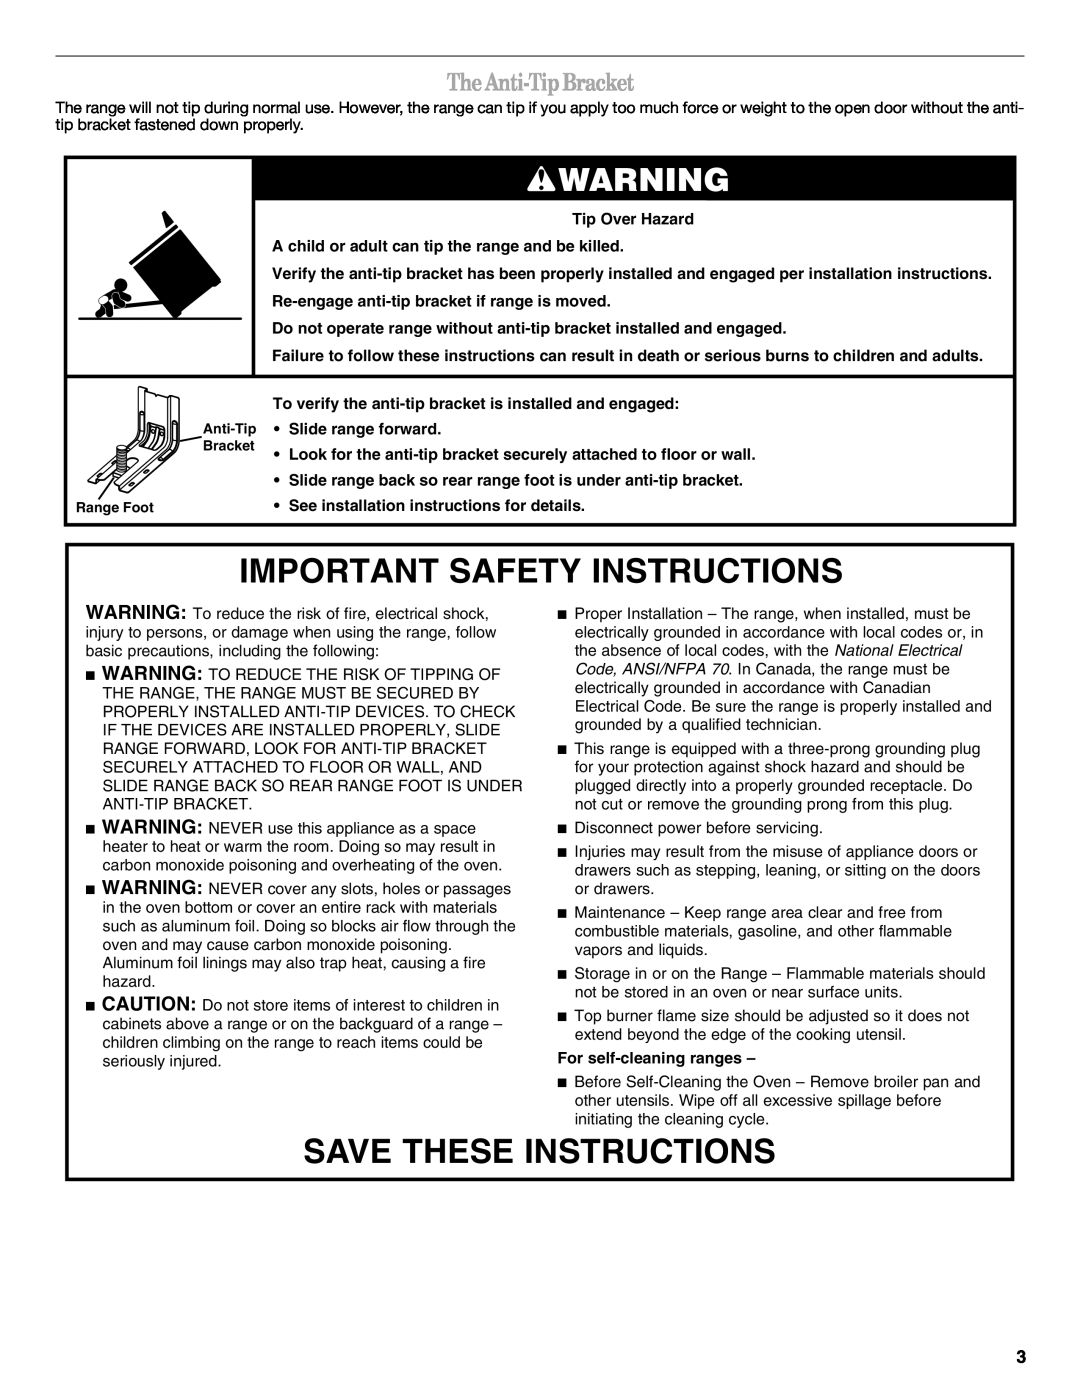 Whirlpool WFG540H0AB, W10392927A, WFG520S0AW TheAnti-TipBracket, Important Safety Instructions, Save These Instructions 